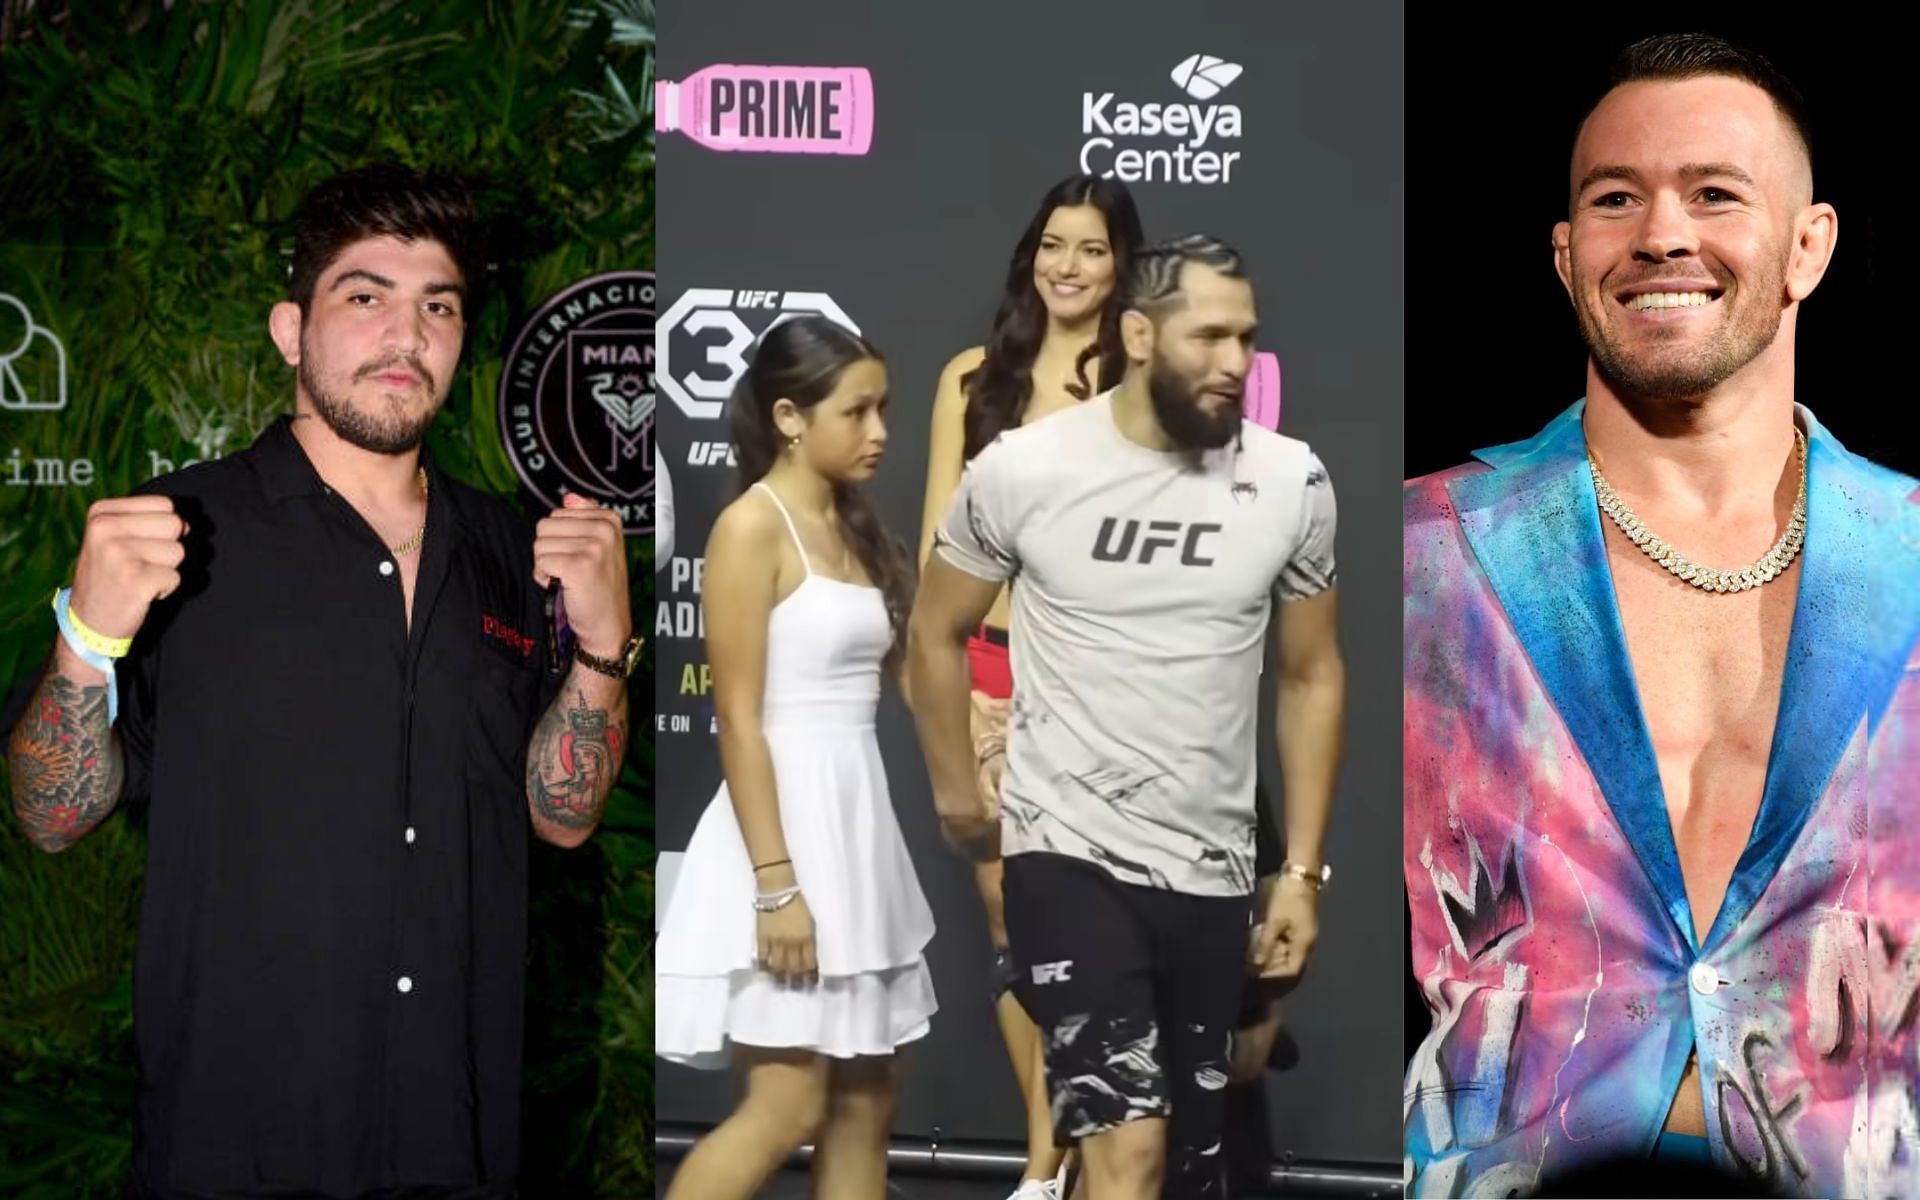 Dillon Danis (left), Jorge Masvidal with his kids at UFC 287 weigh-in (middle) [Image courtesy: @TheMacLife on YouTube] and Colby Covington (right)